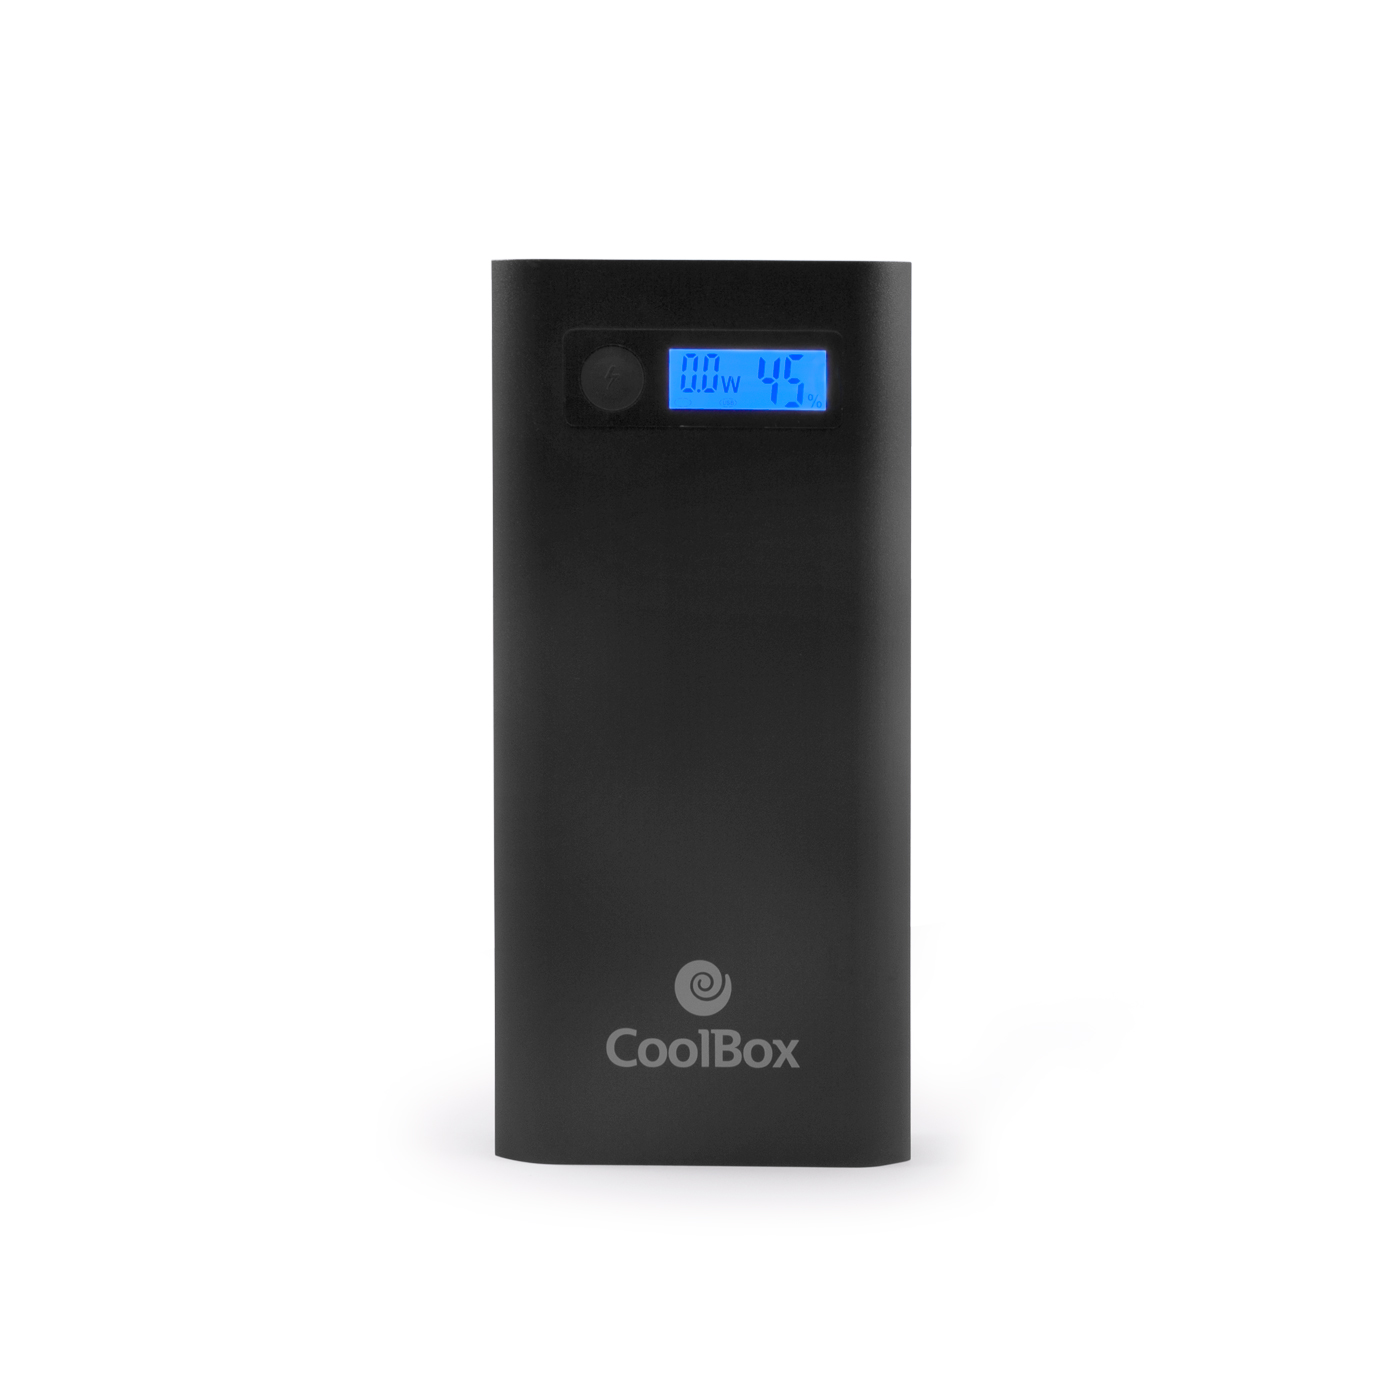 Coolbox - PowerBank 45W 20100mAh con USB-C, PowerDelivery y QuickCharge 3.0